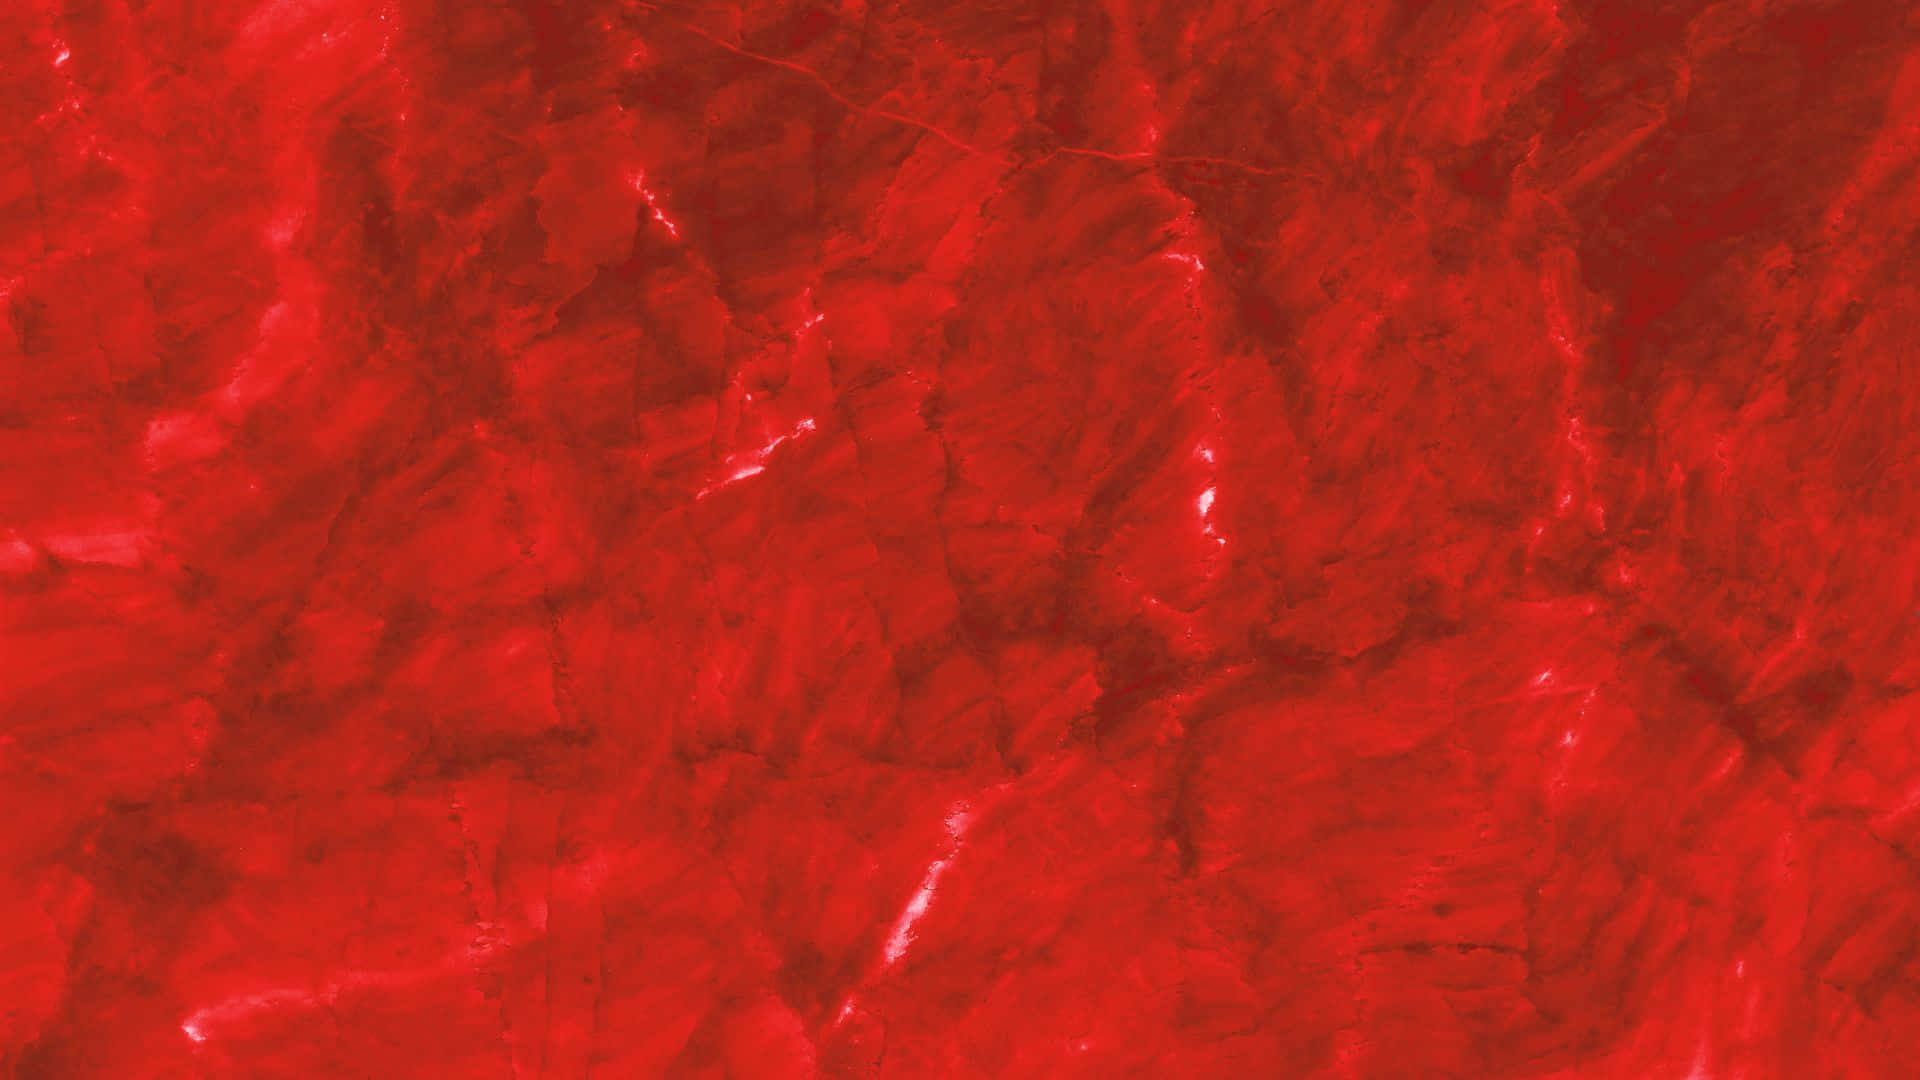 100+] Red Texture Backgrounds